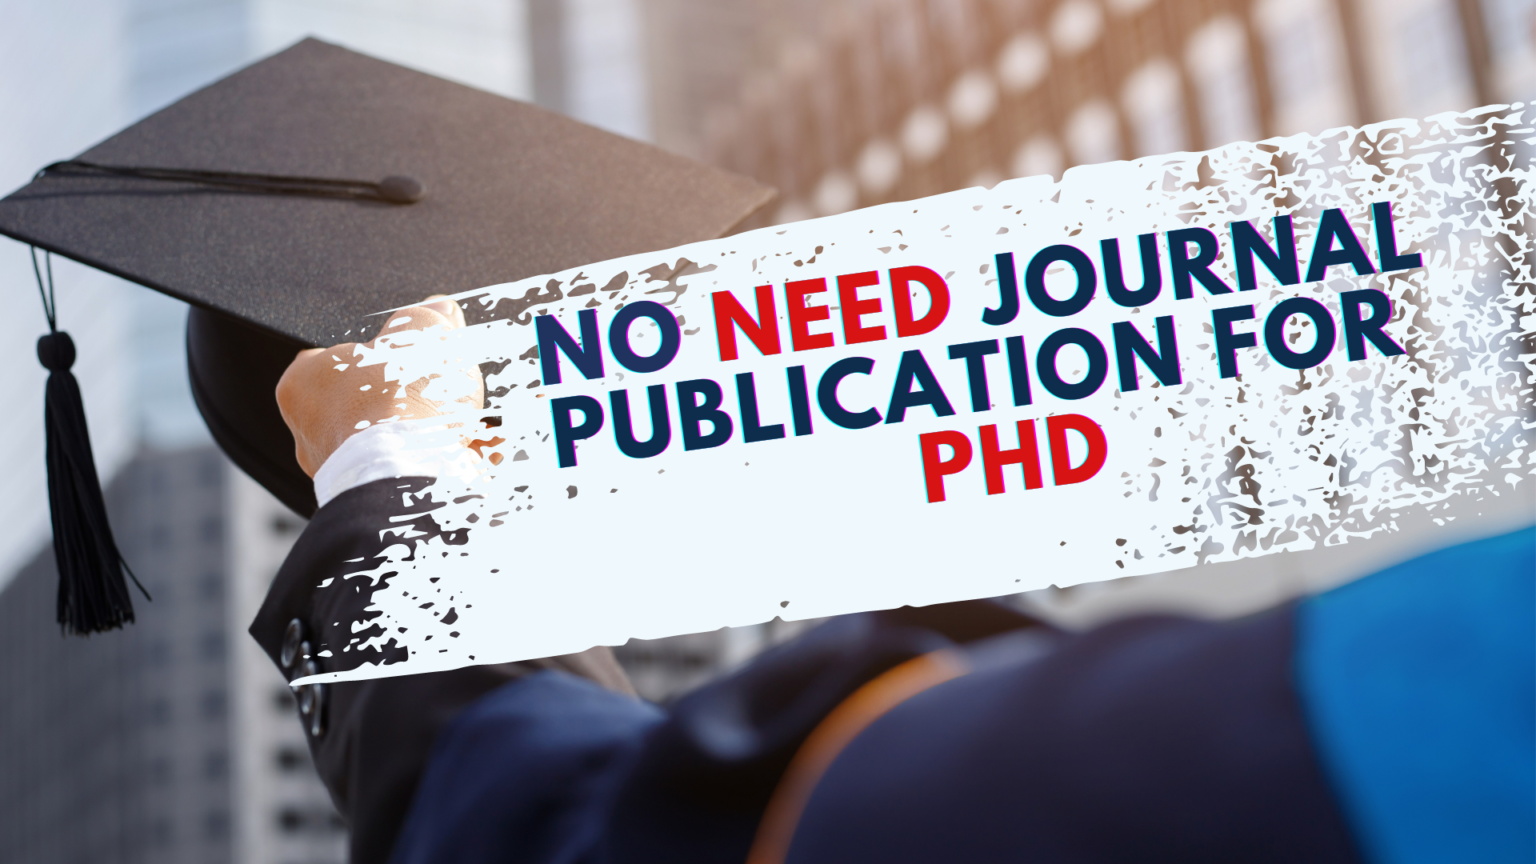 phd without publications